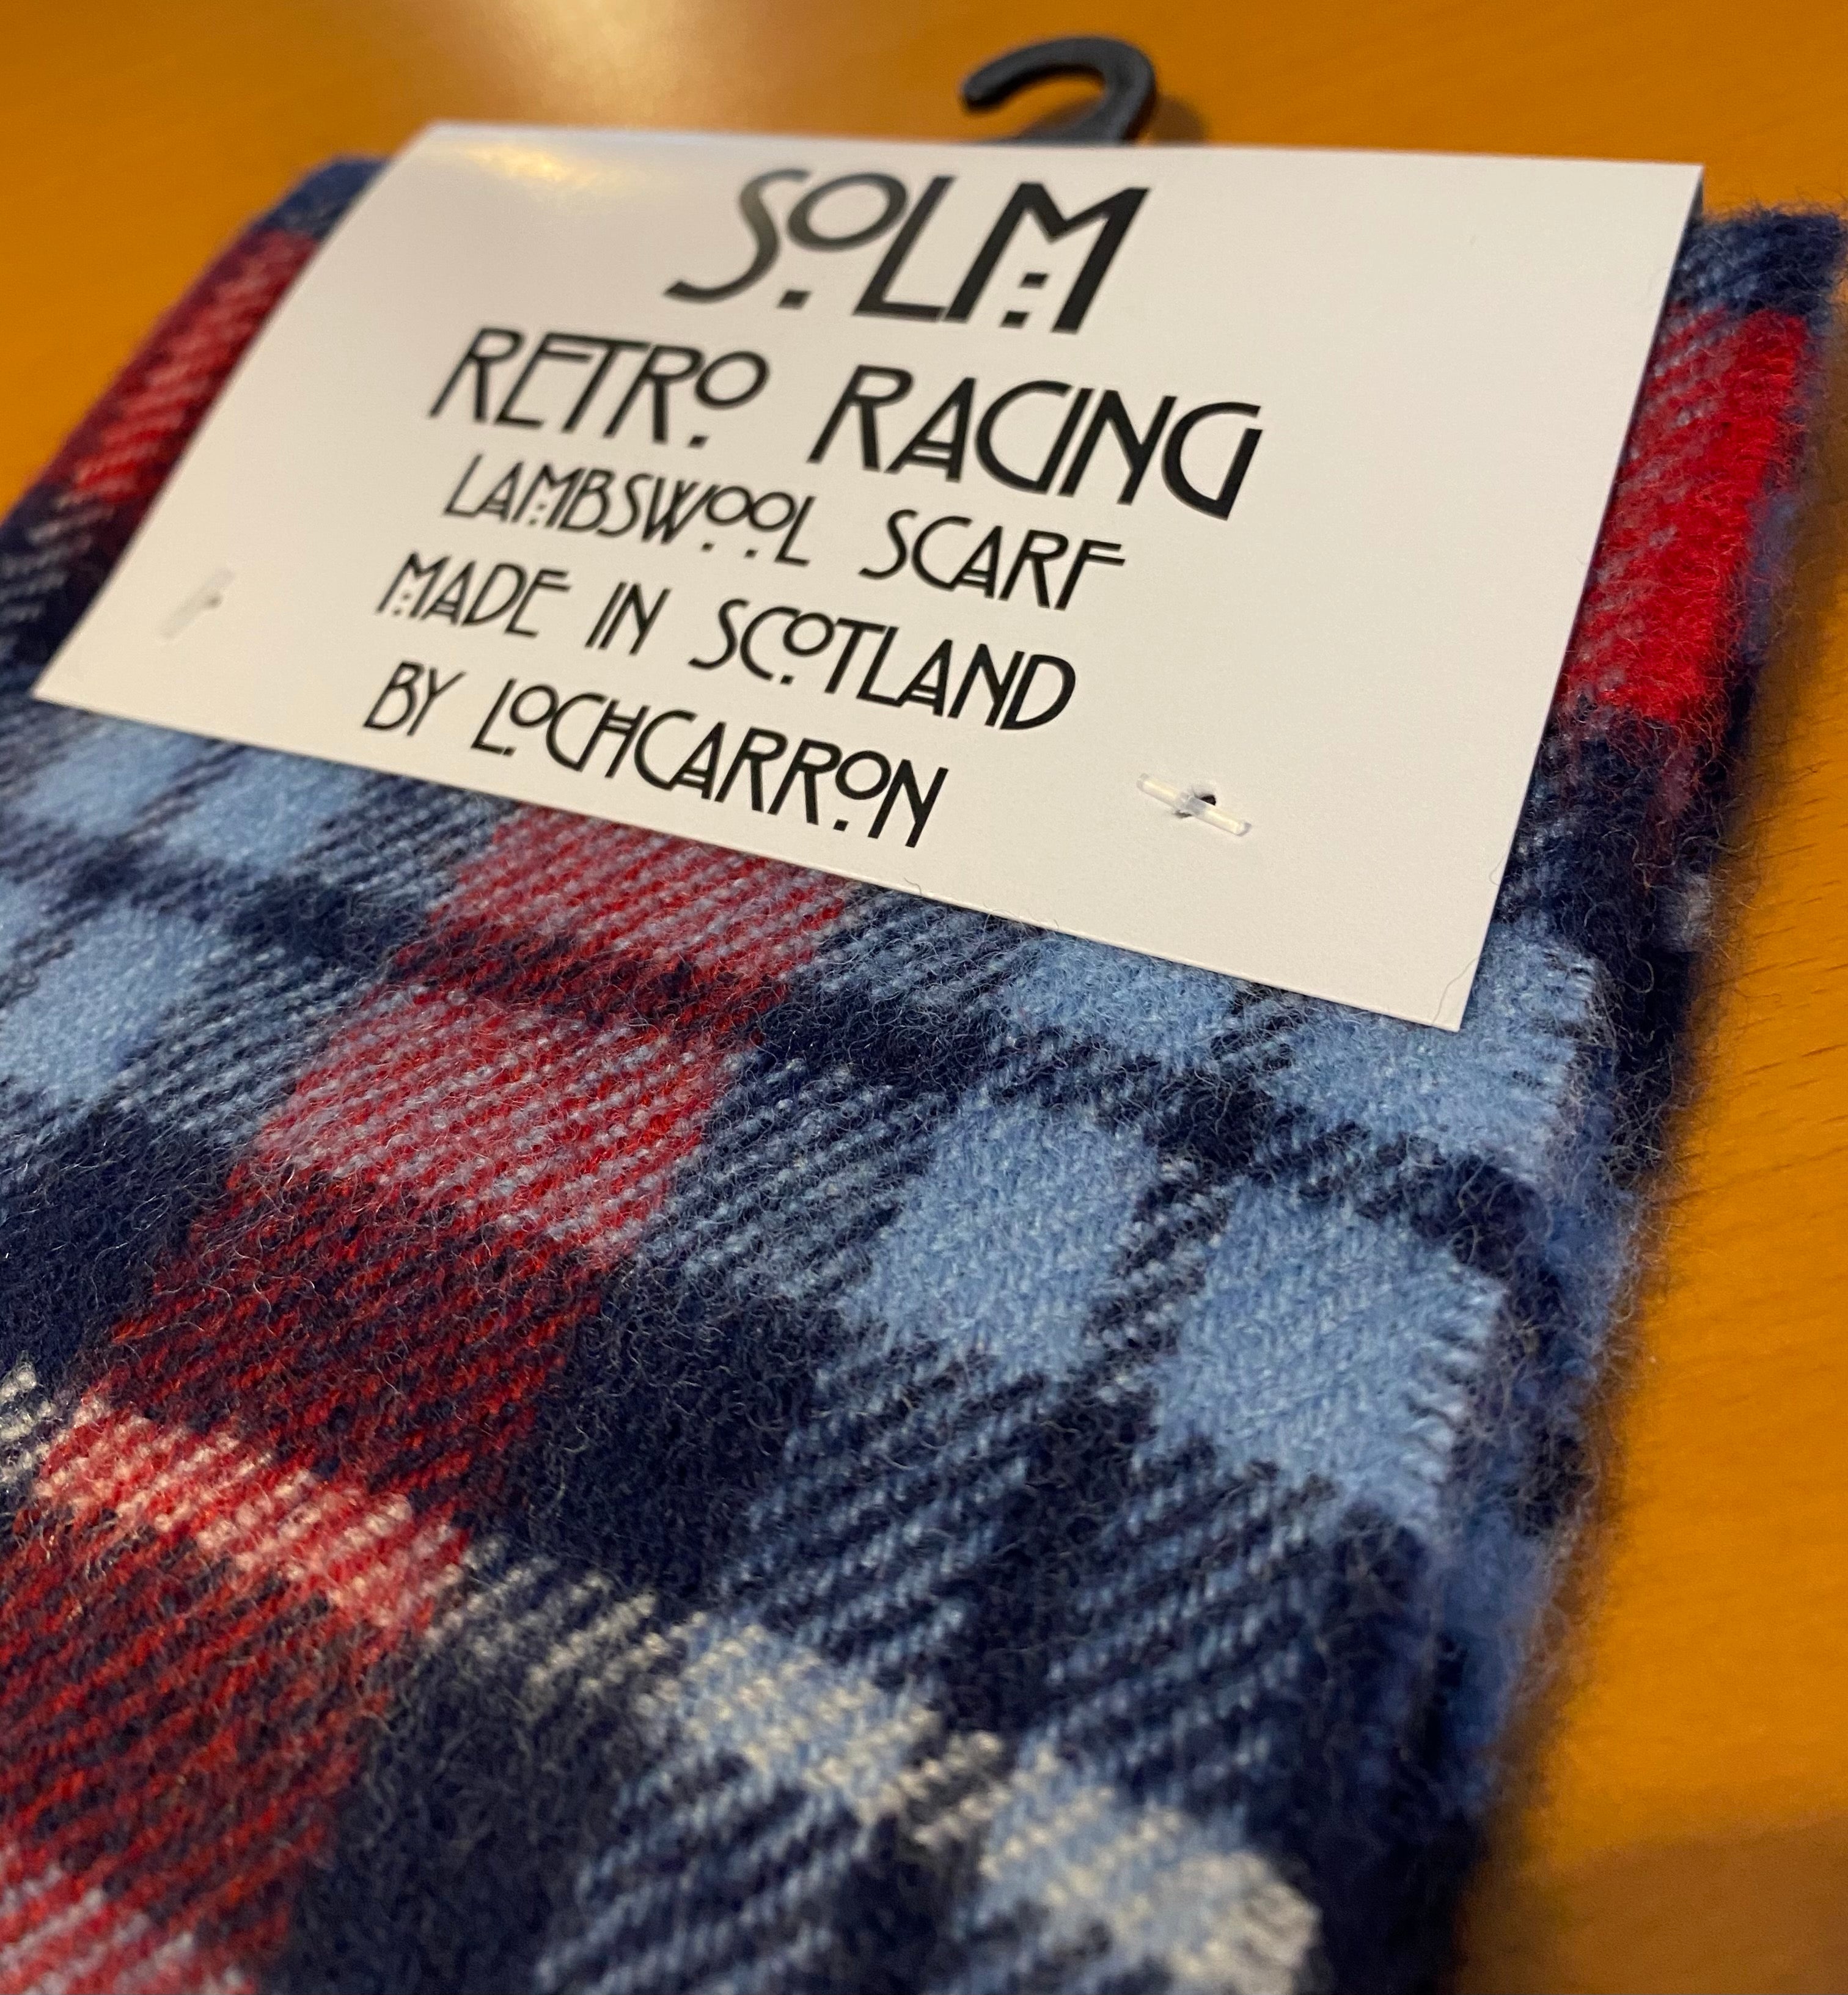 SOLM Lambswool Scarf (Retro Racing)